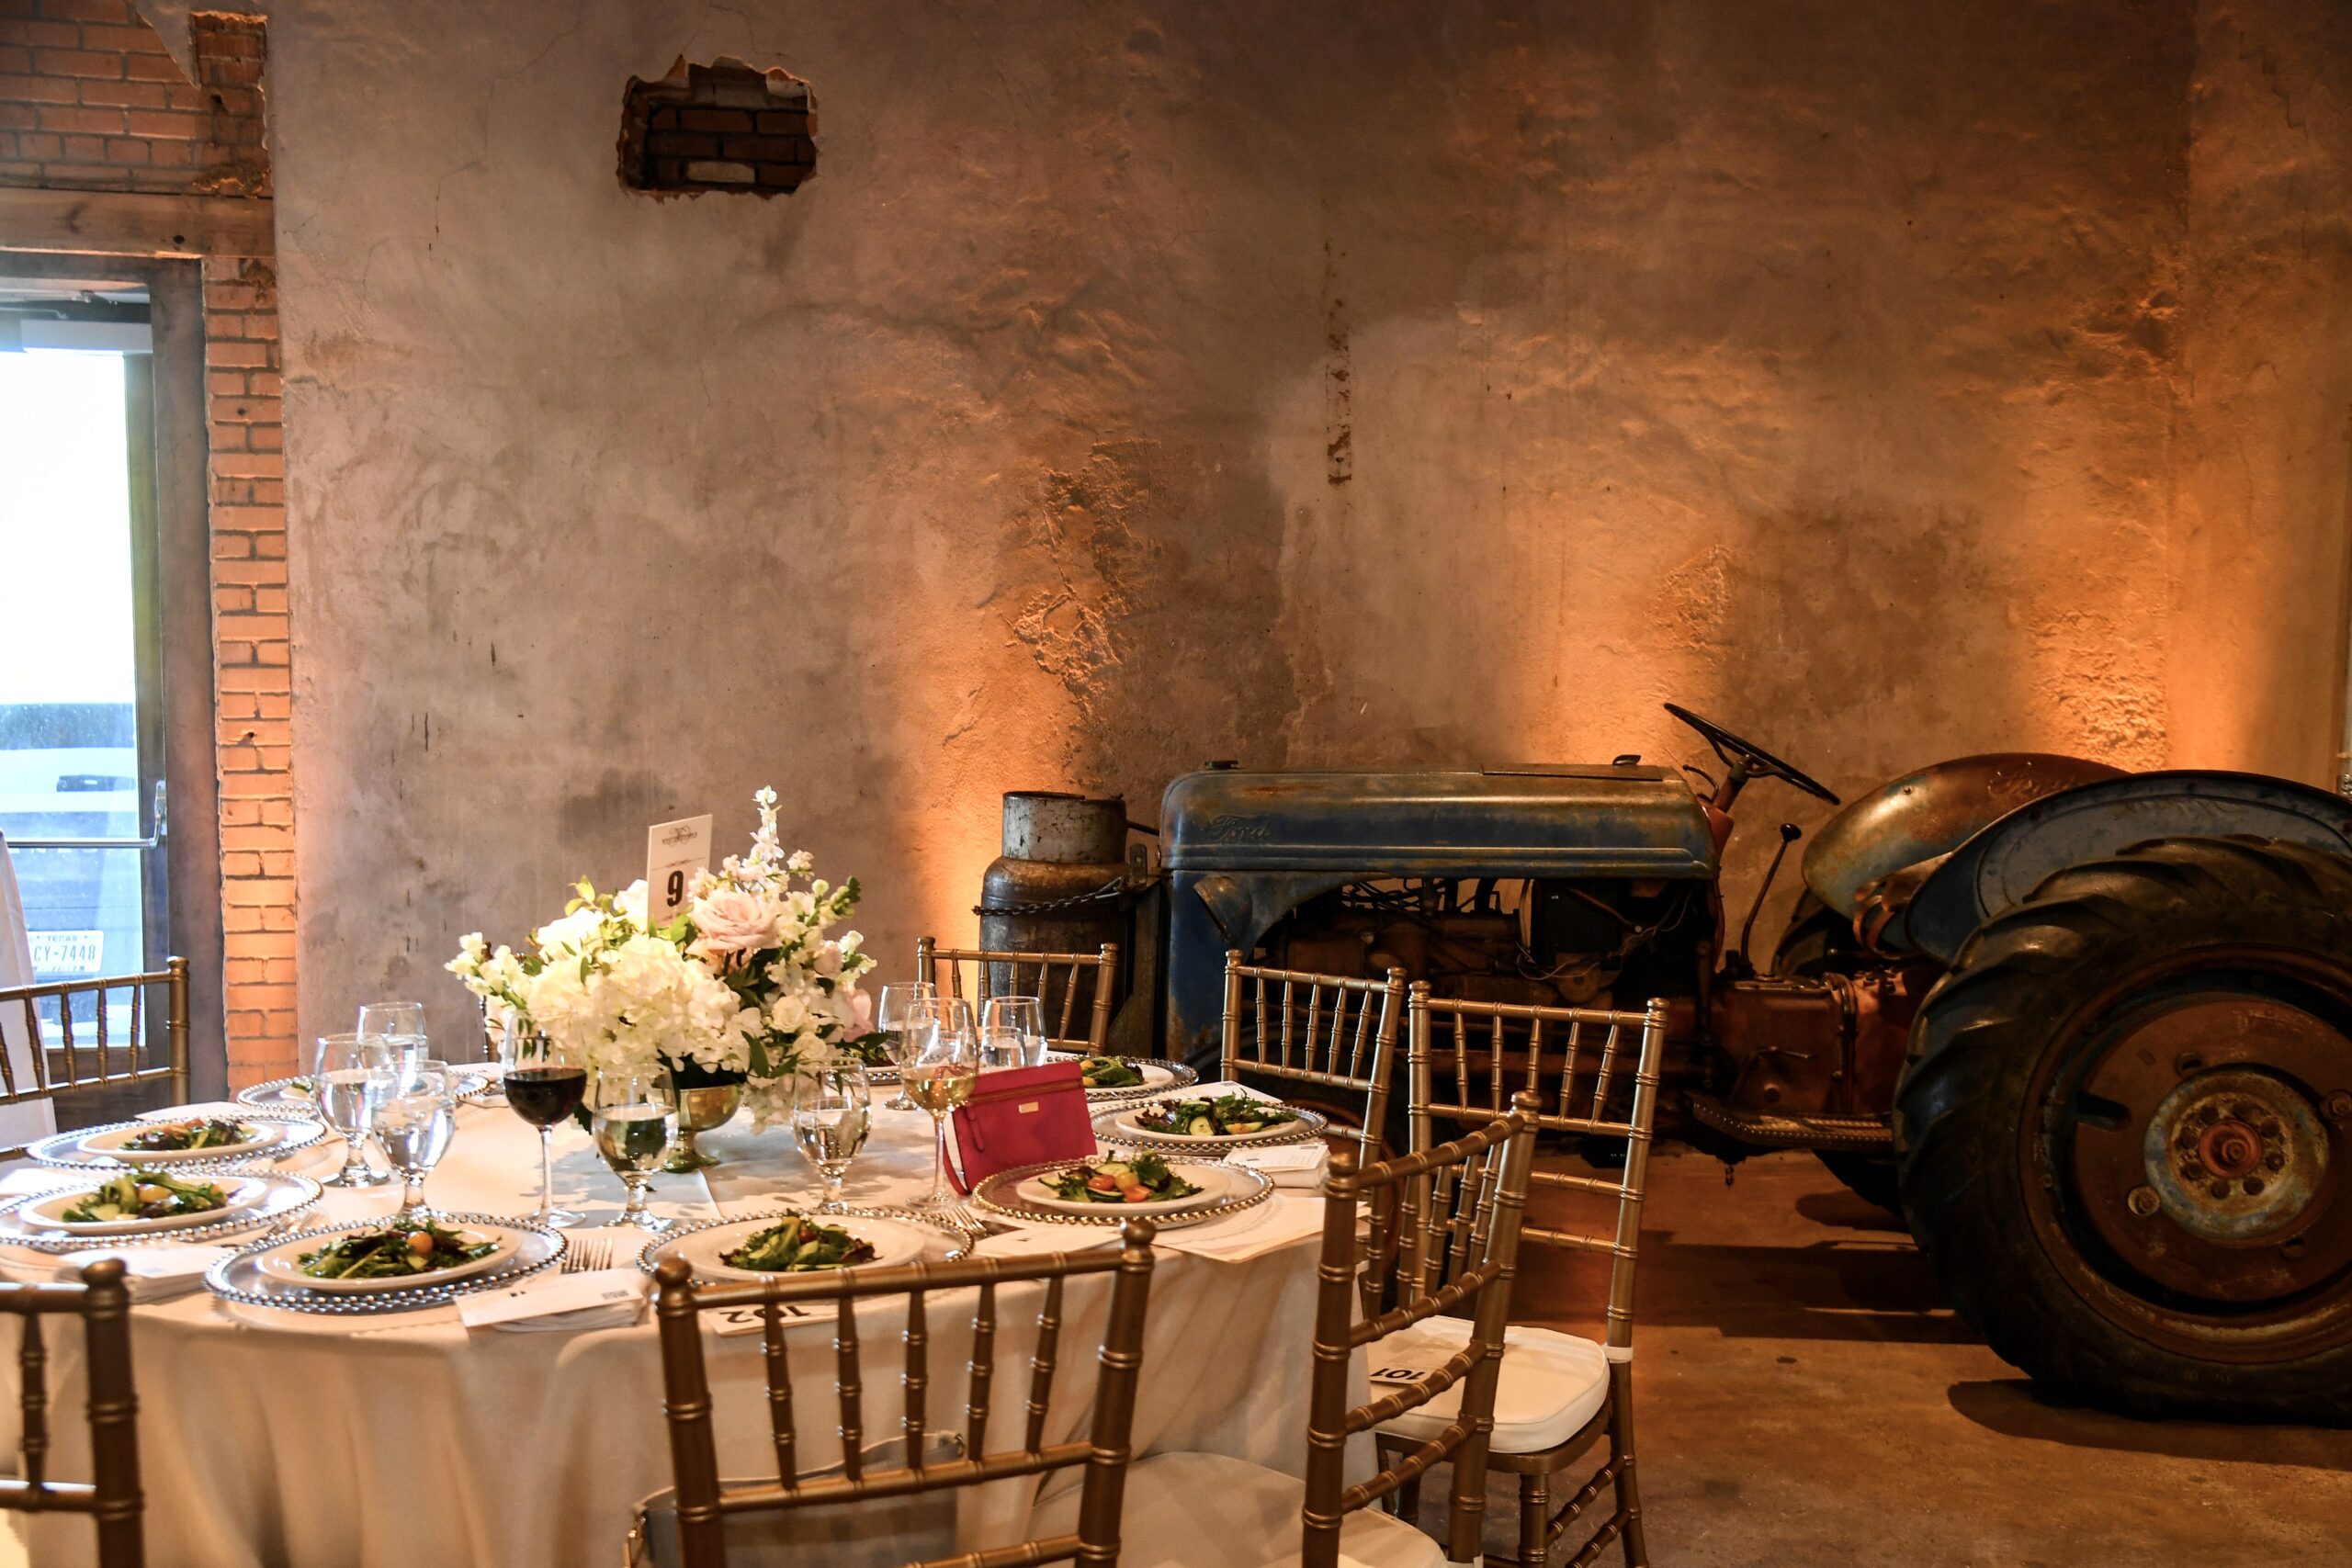 Table Setting with Rustic Tractor Decor in Back